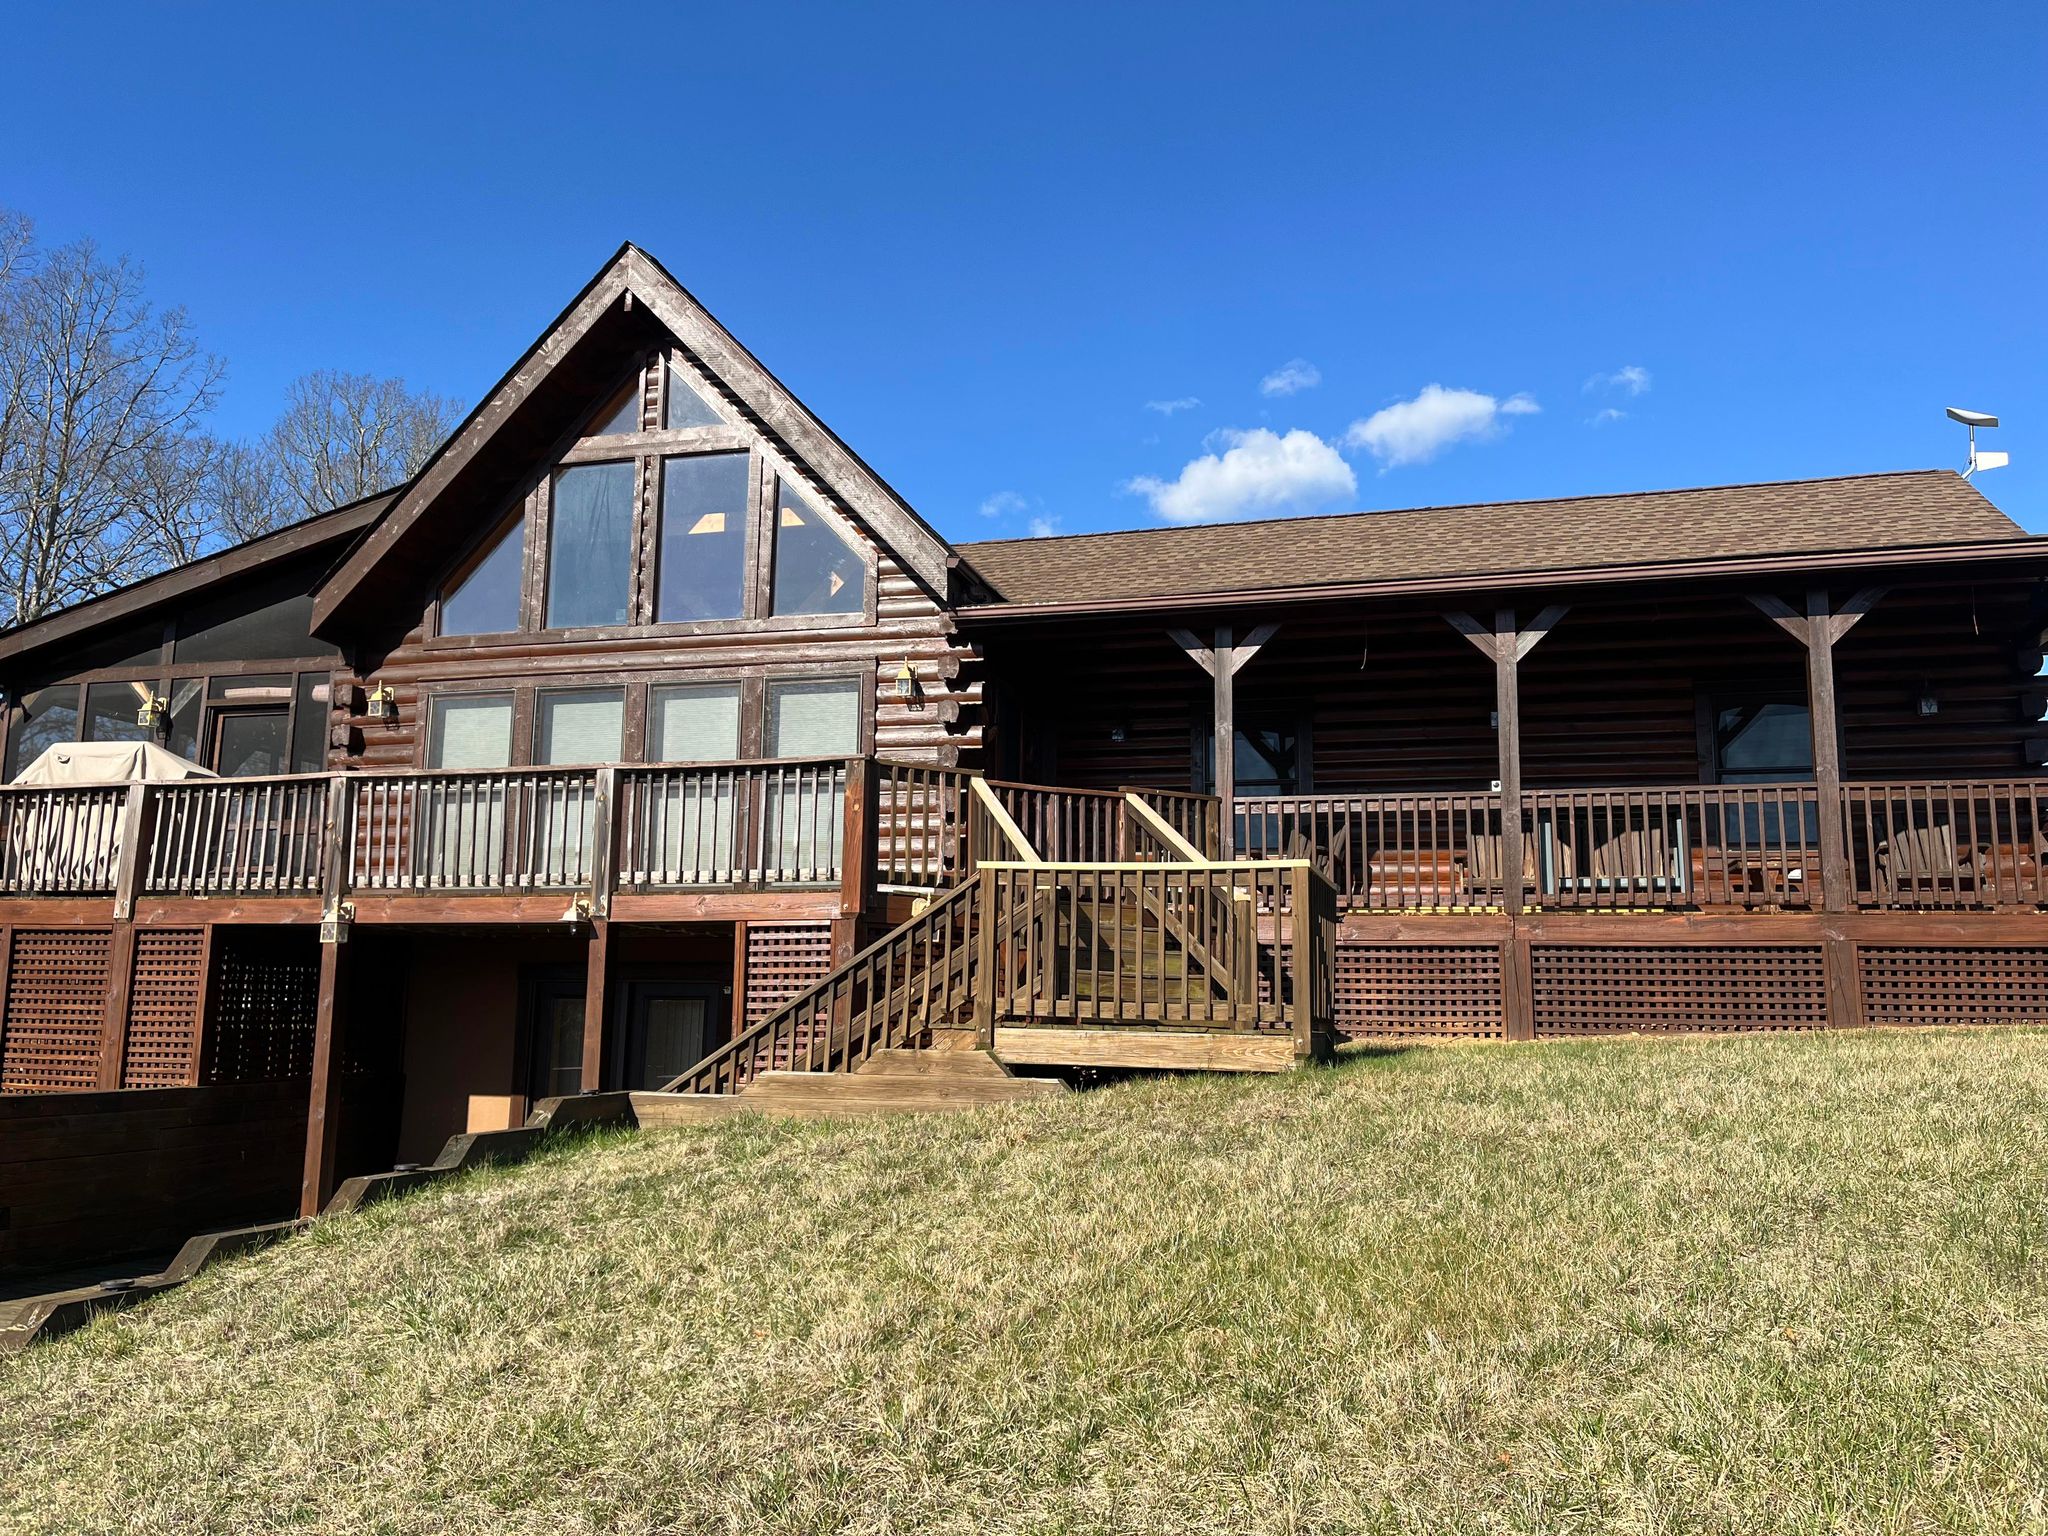 112 Sea Biscuit Drive, Points, WV 25437